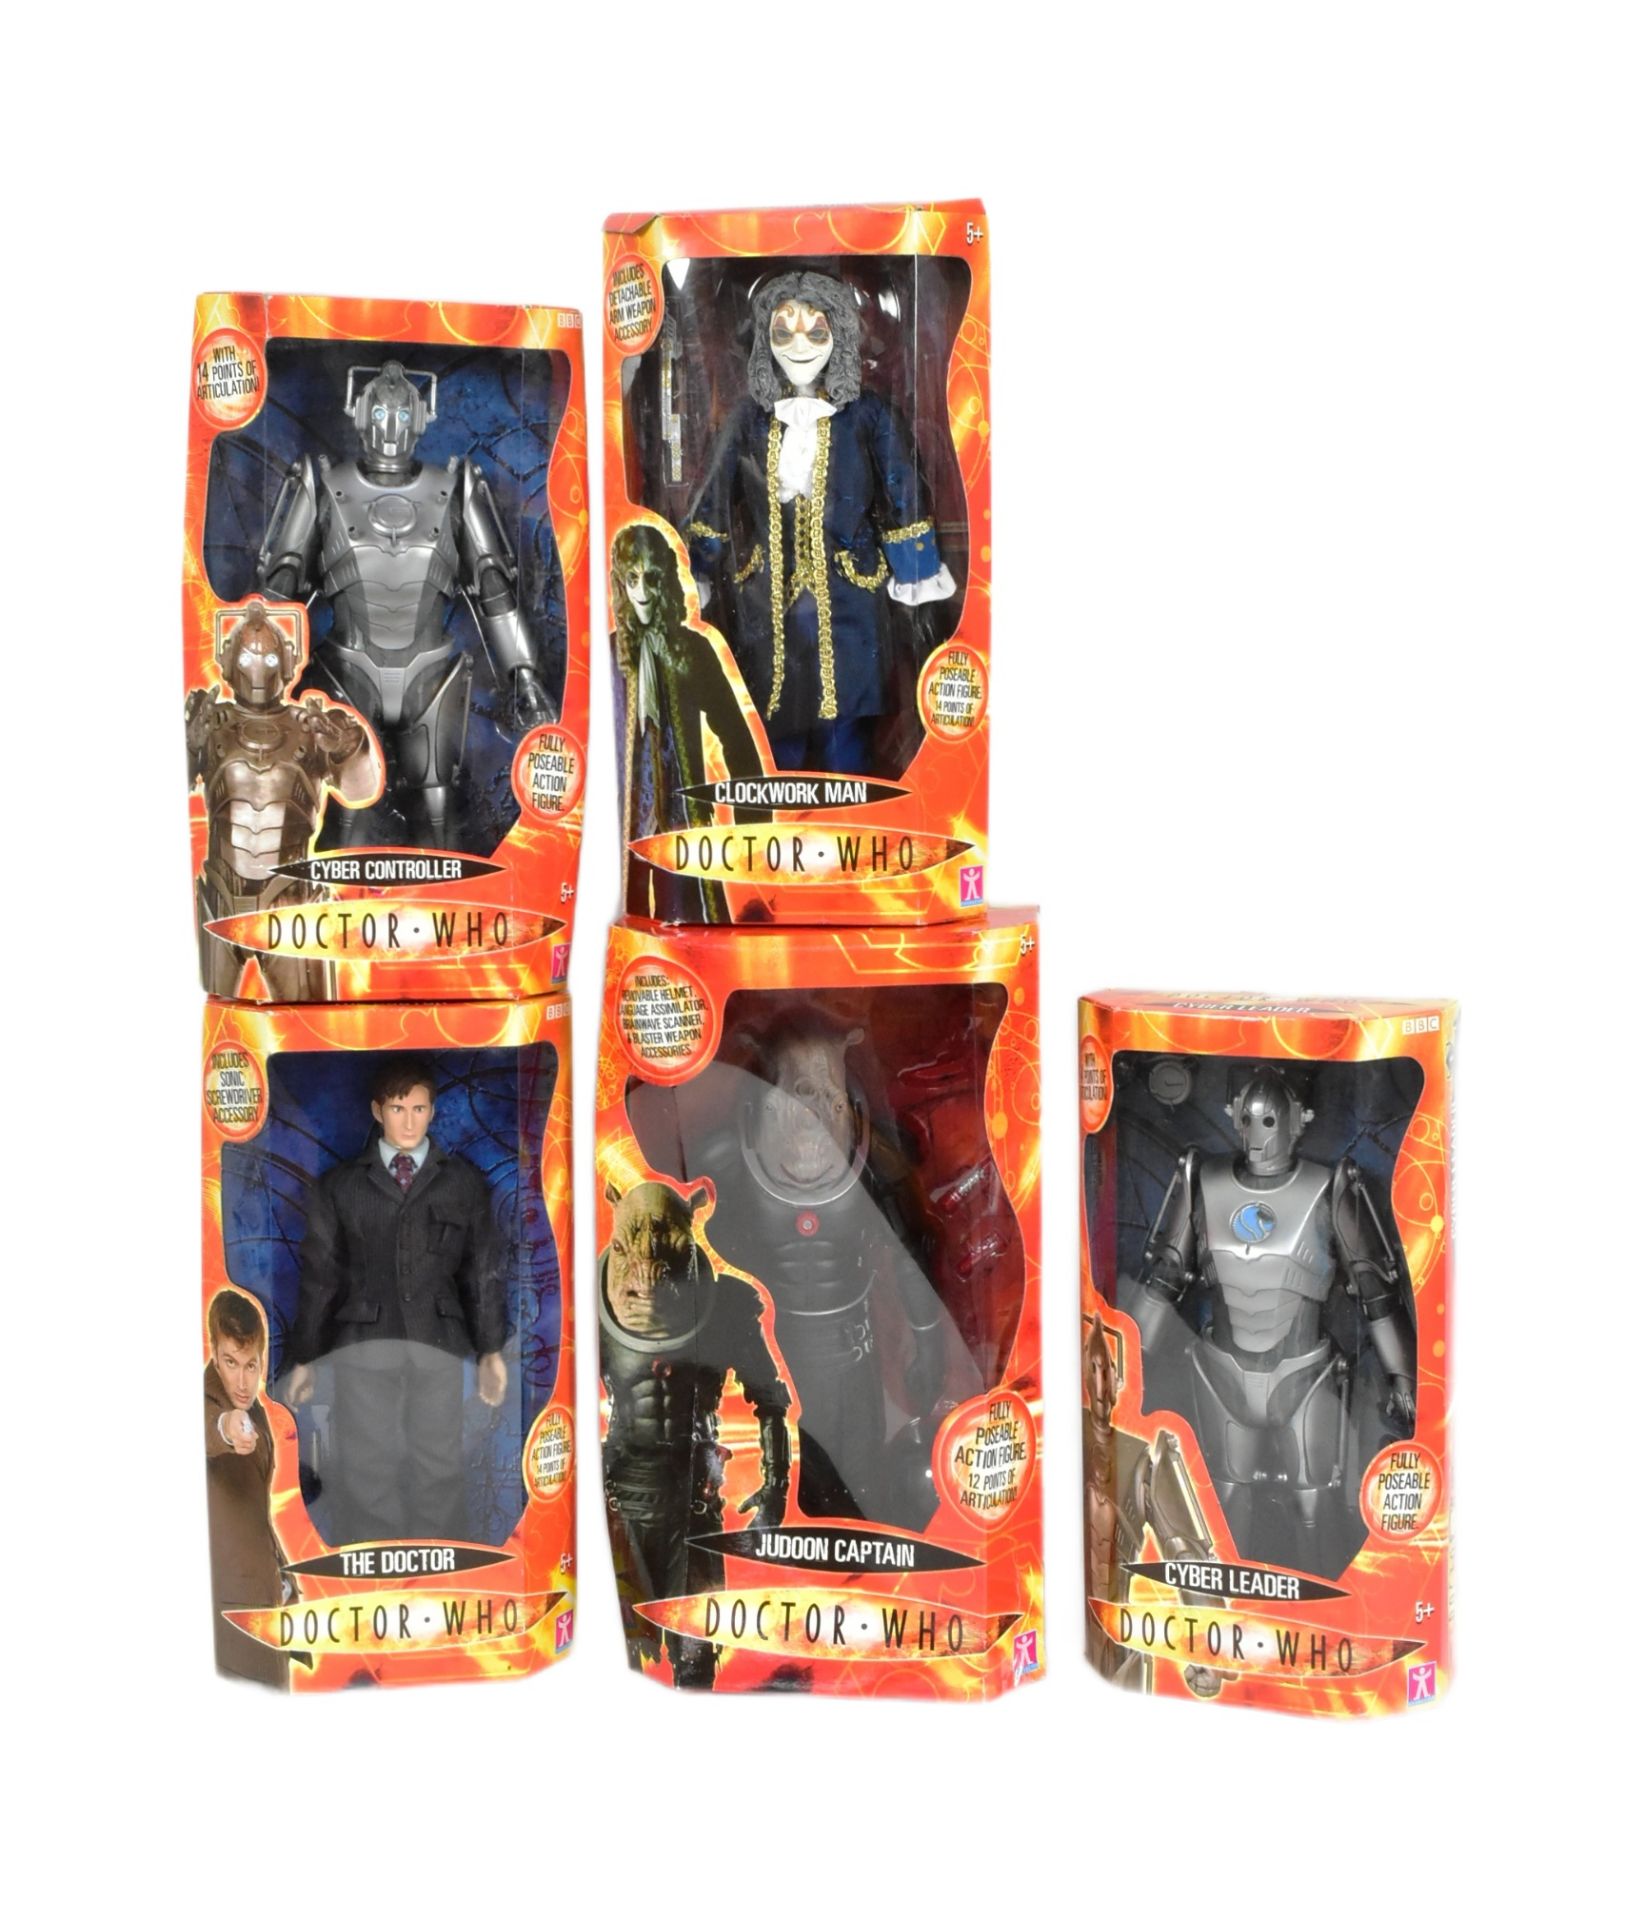 DOCTOR WHO - 12" SCALE ACTION FIGURES - BOXED COLLECTION